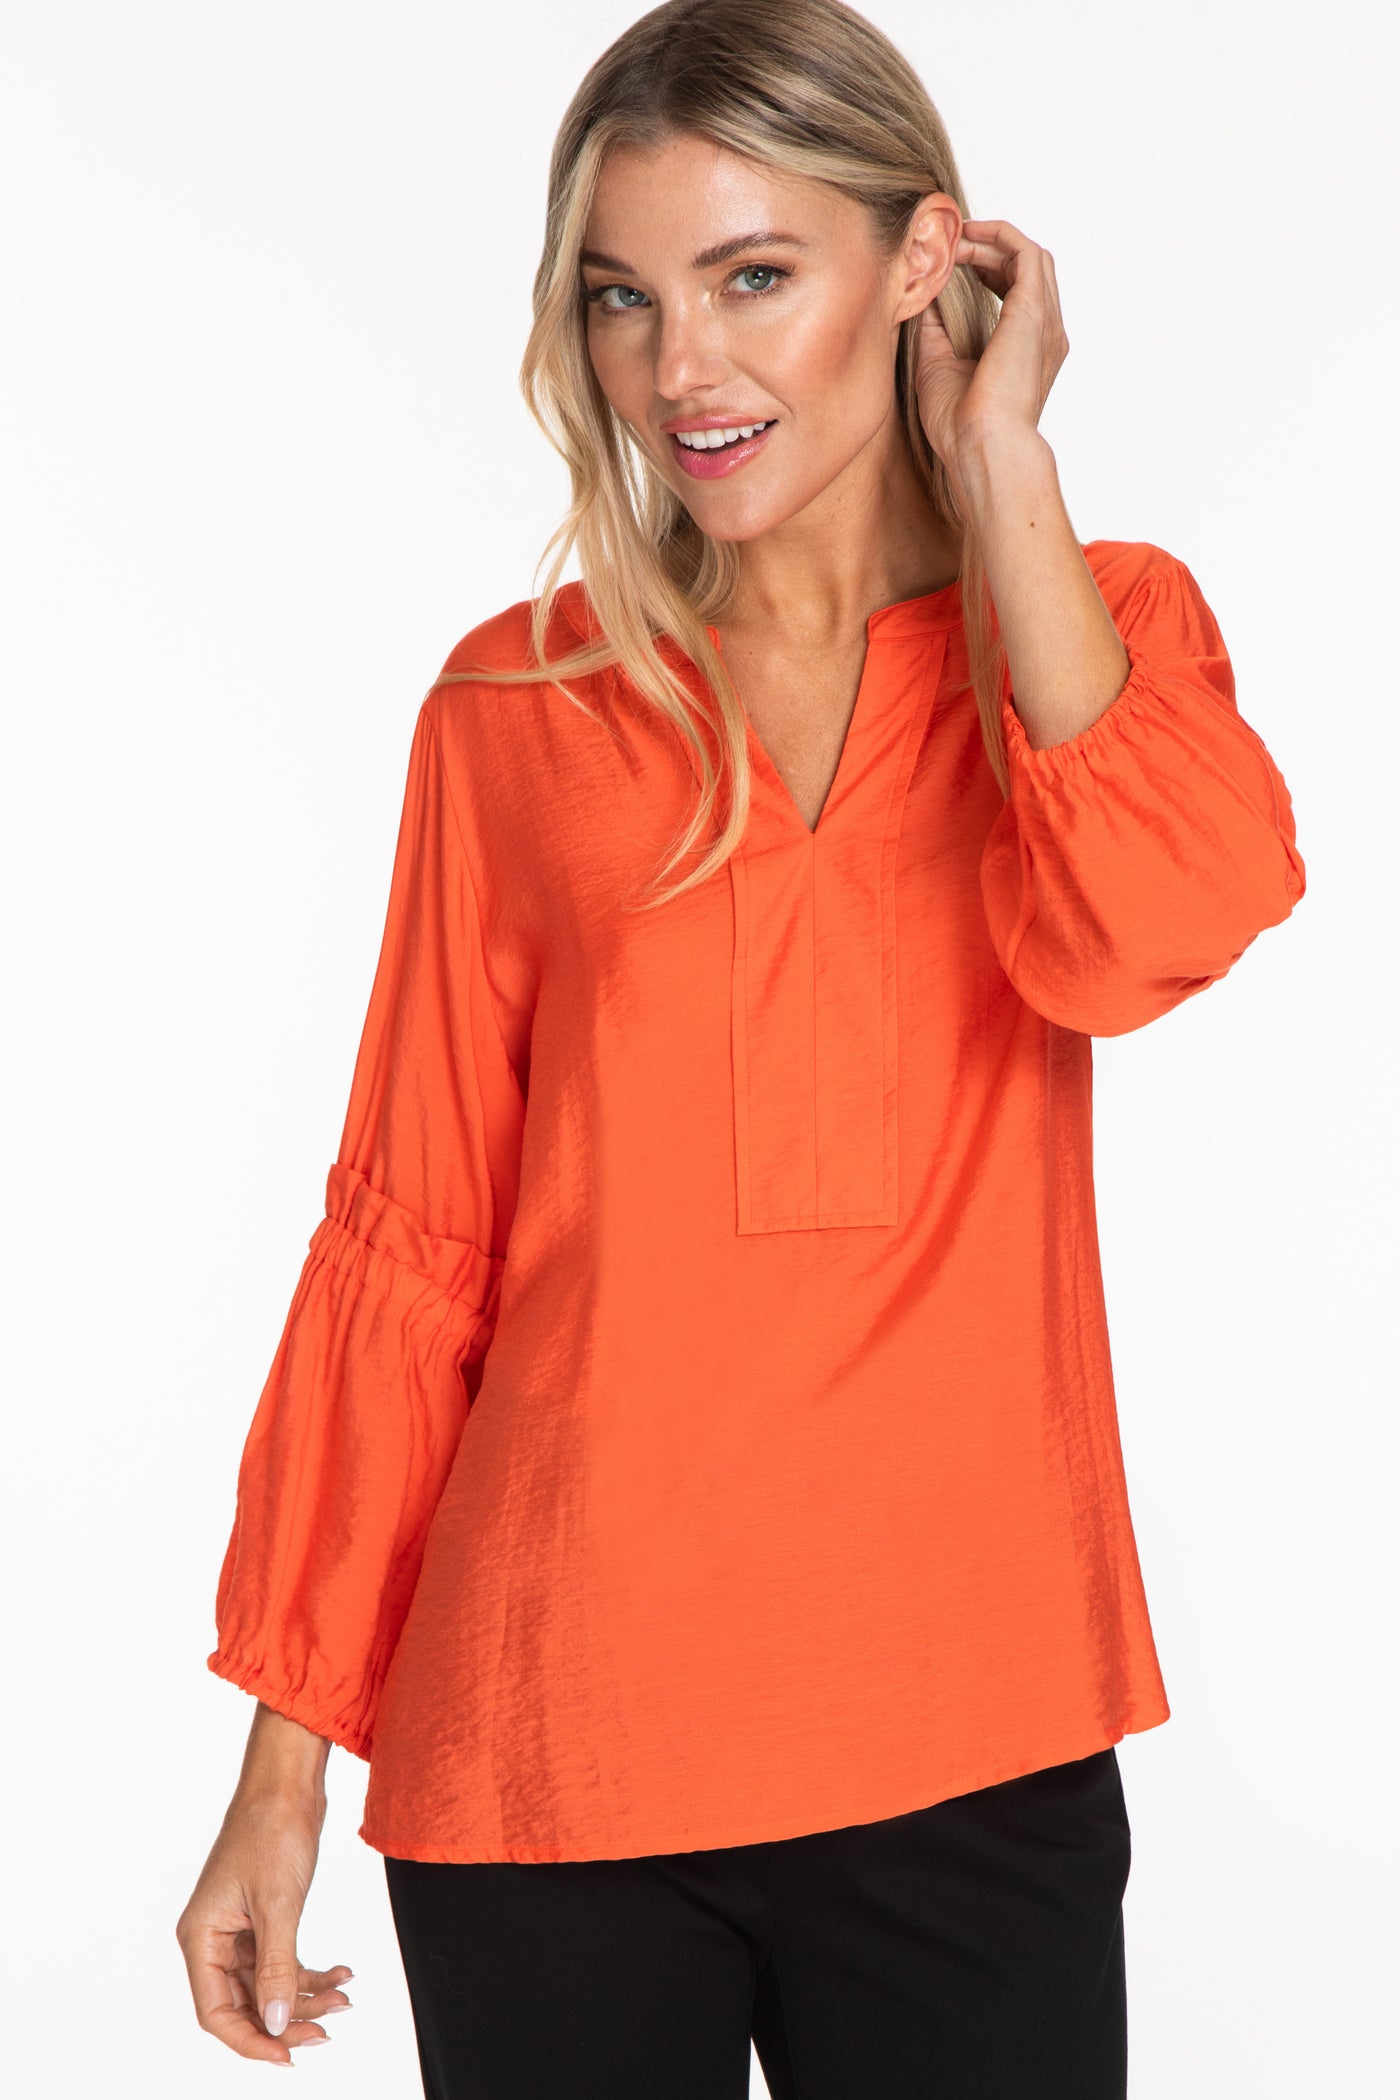 Bell Sleeve Crinkle Woven Top - Women's - Coral